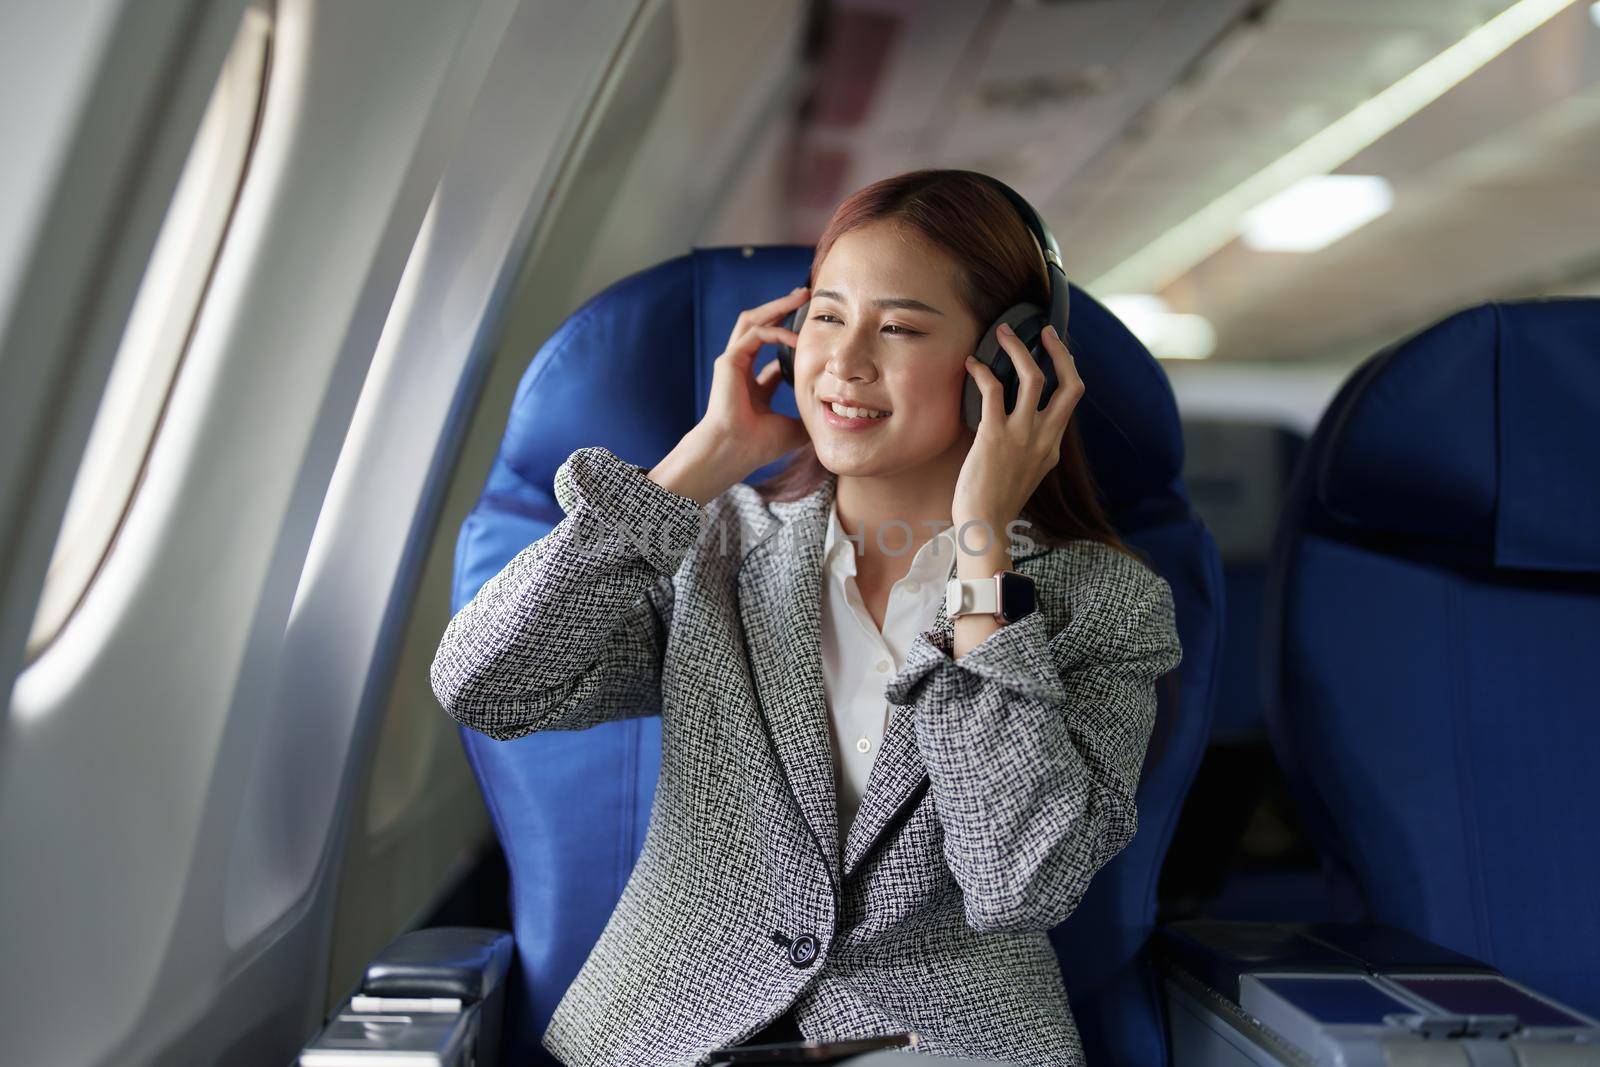 portrait of A successful asian business woman in a plane sits in a business class seat and uses a Around-Ears Headphones for playing music during flight. relax concept.